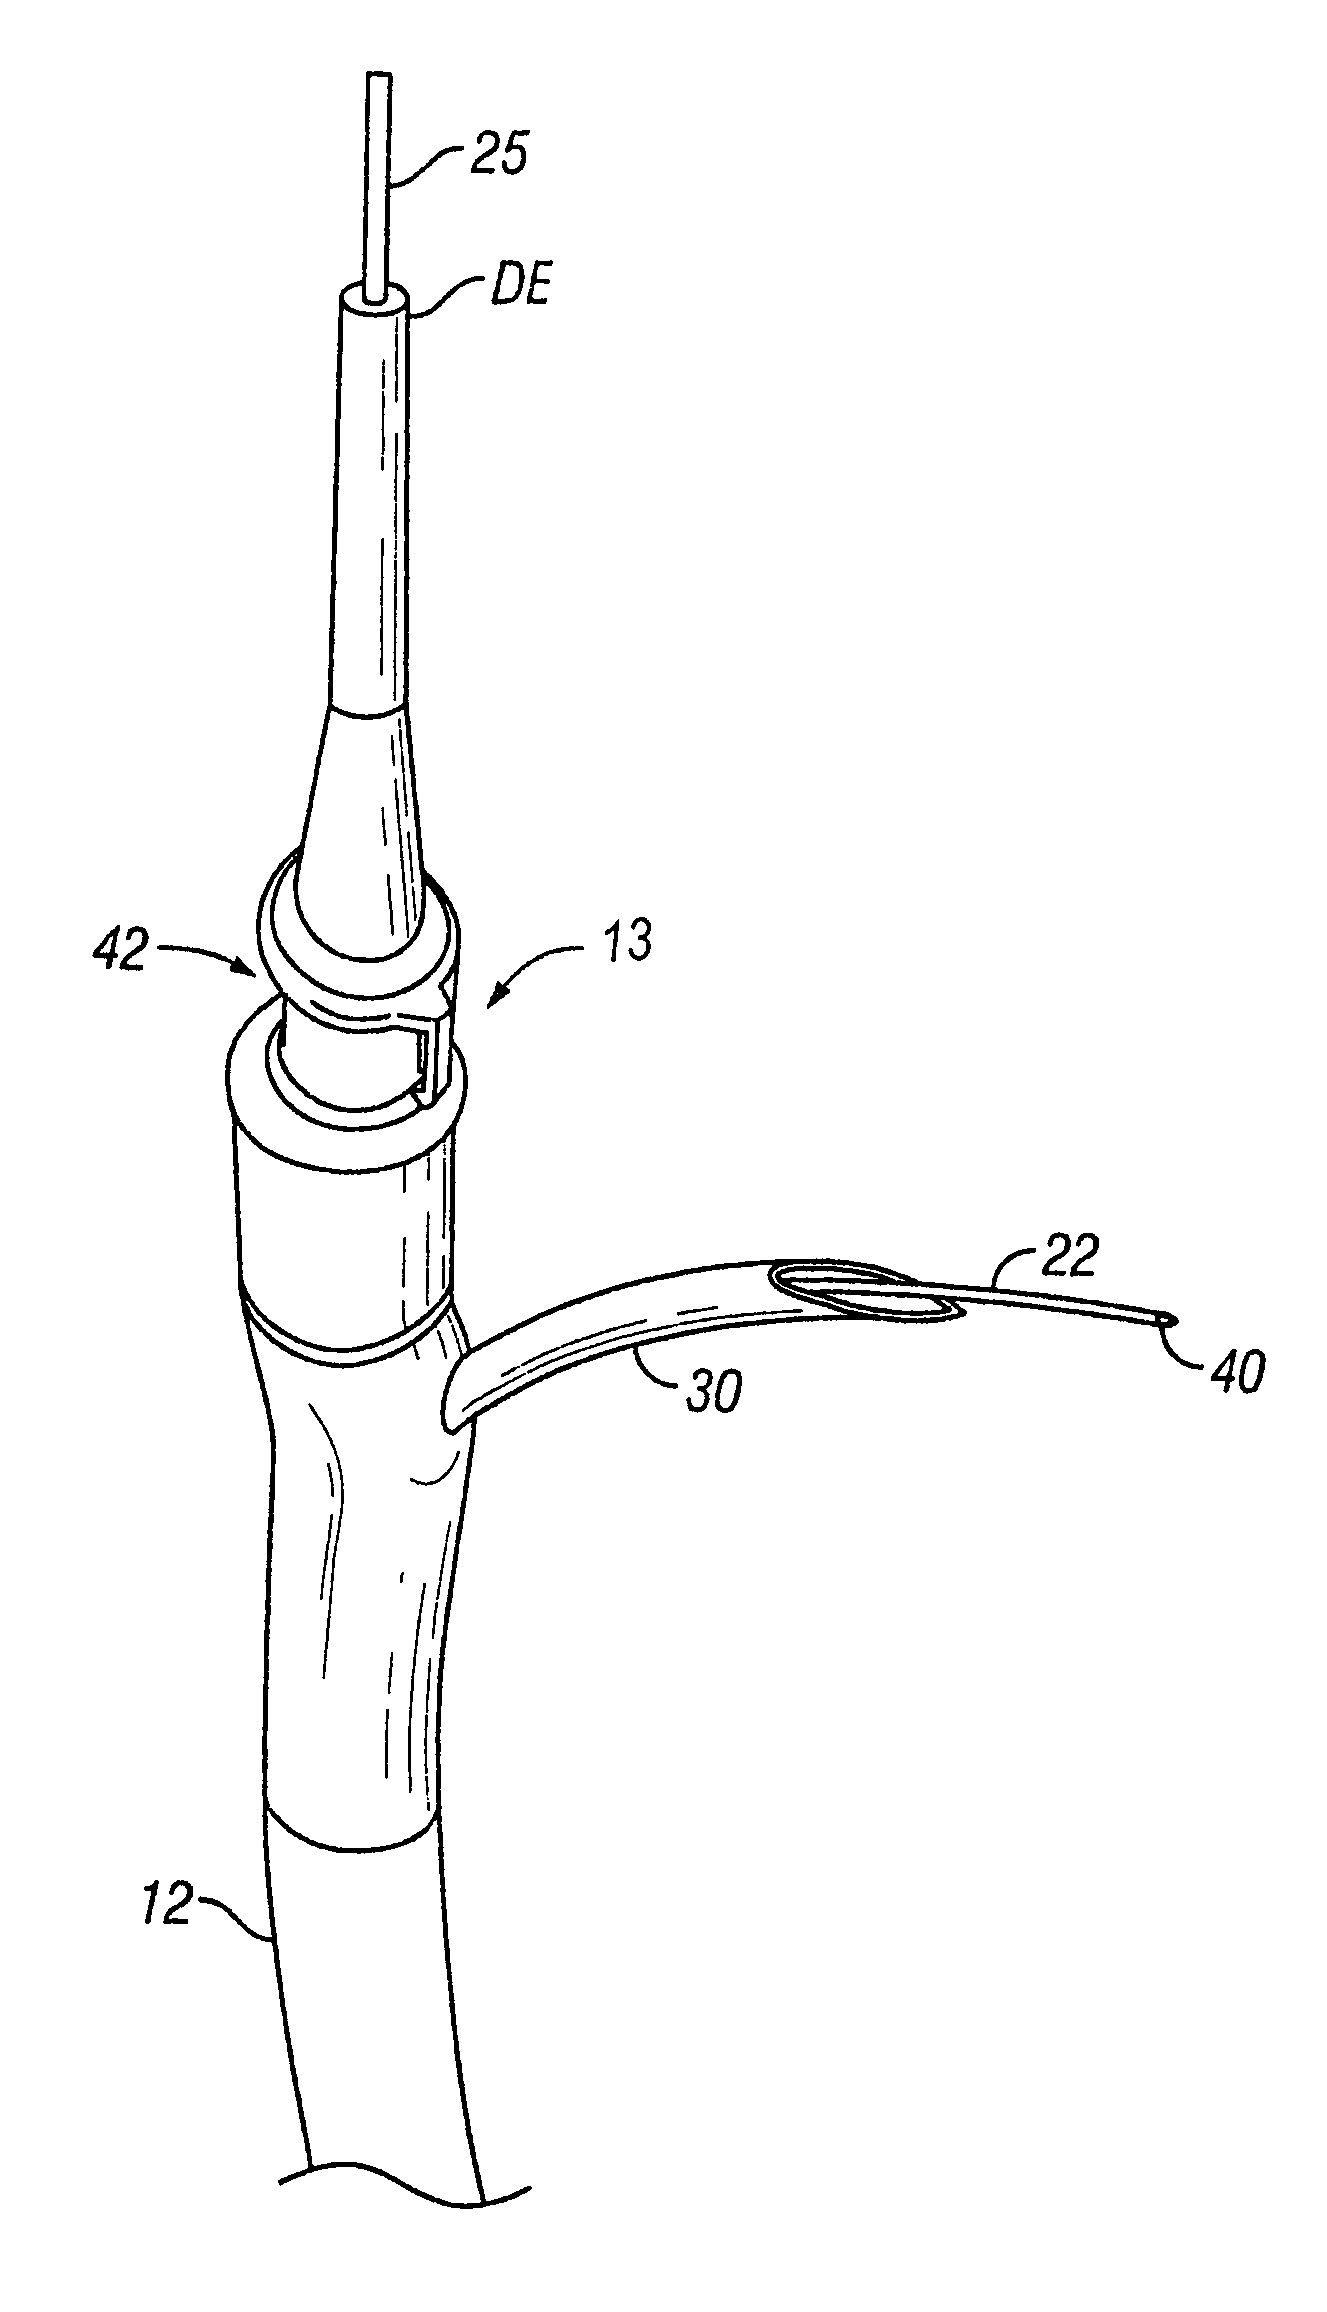 Guidewires and delivery catheters having fiber optic sensing components and related systems and methods